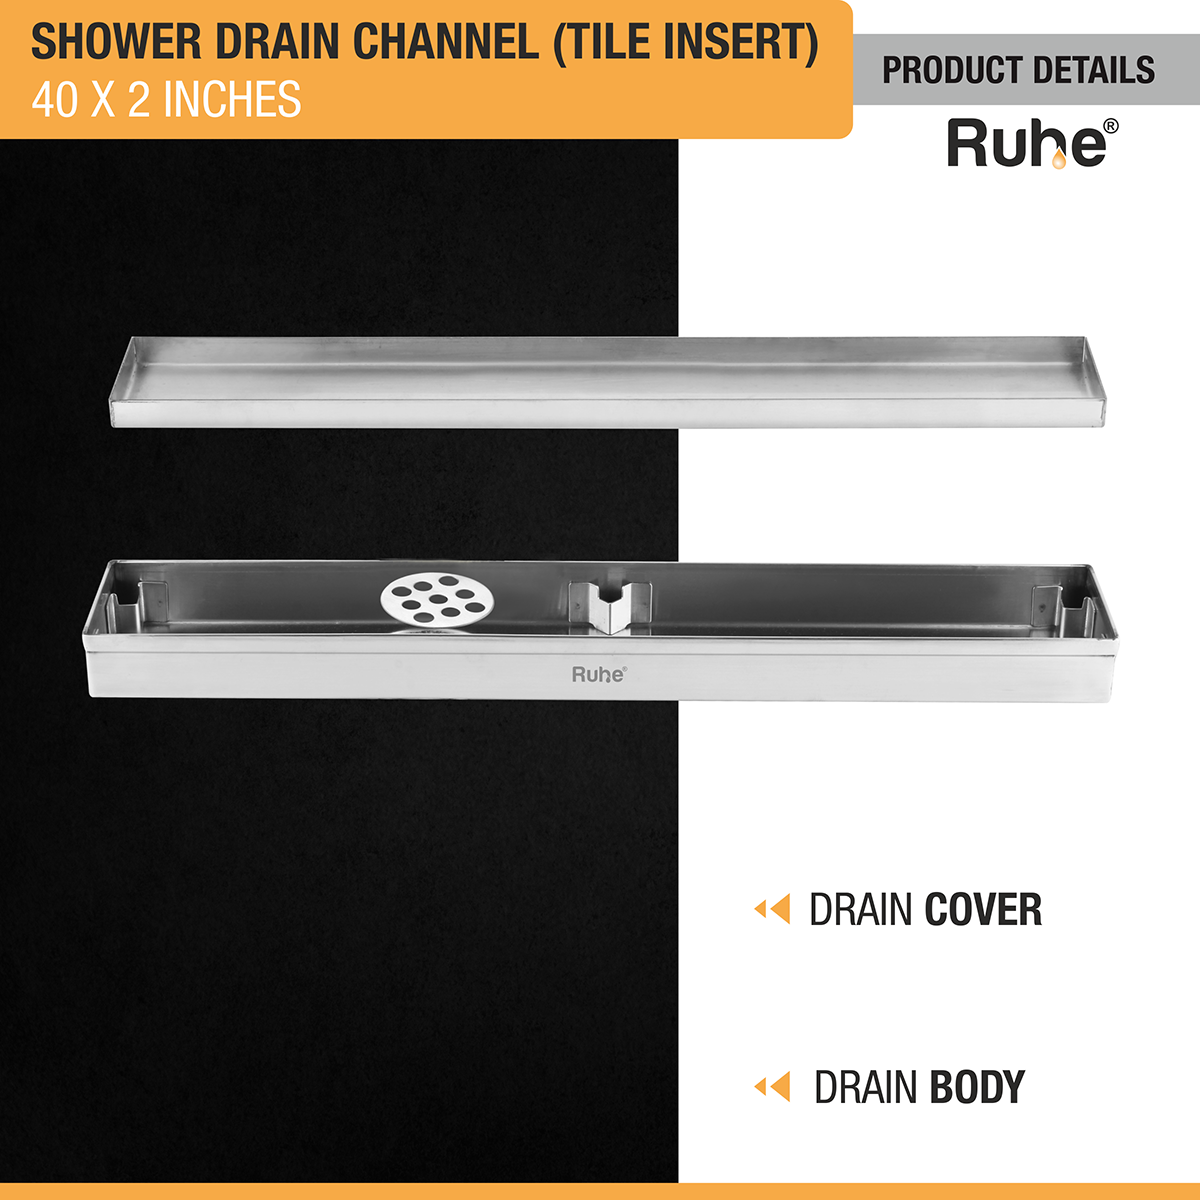 Tile Insert Shower Drain Channel (40 x 2 Inches) (304 Grade) with drain cover and drain body